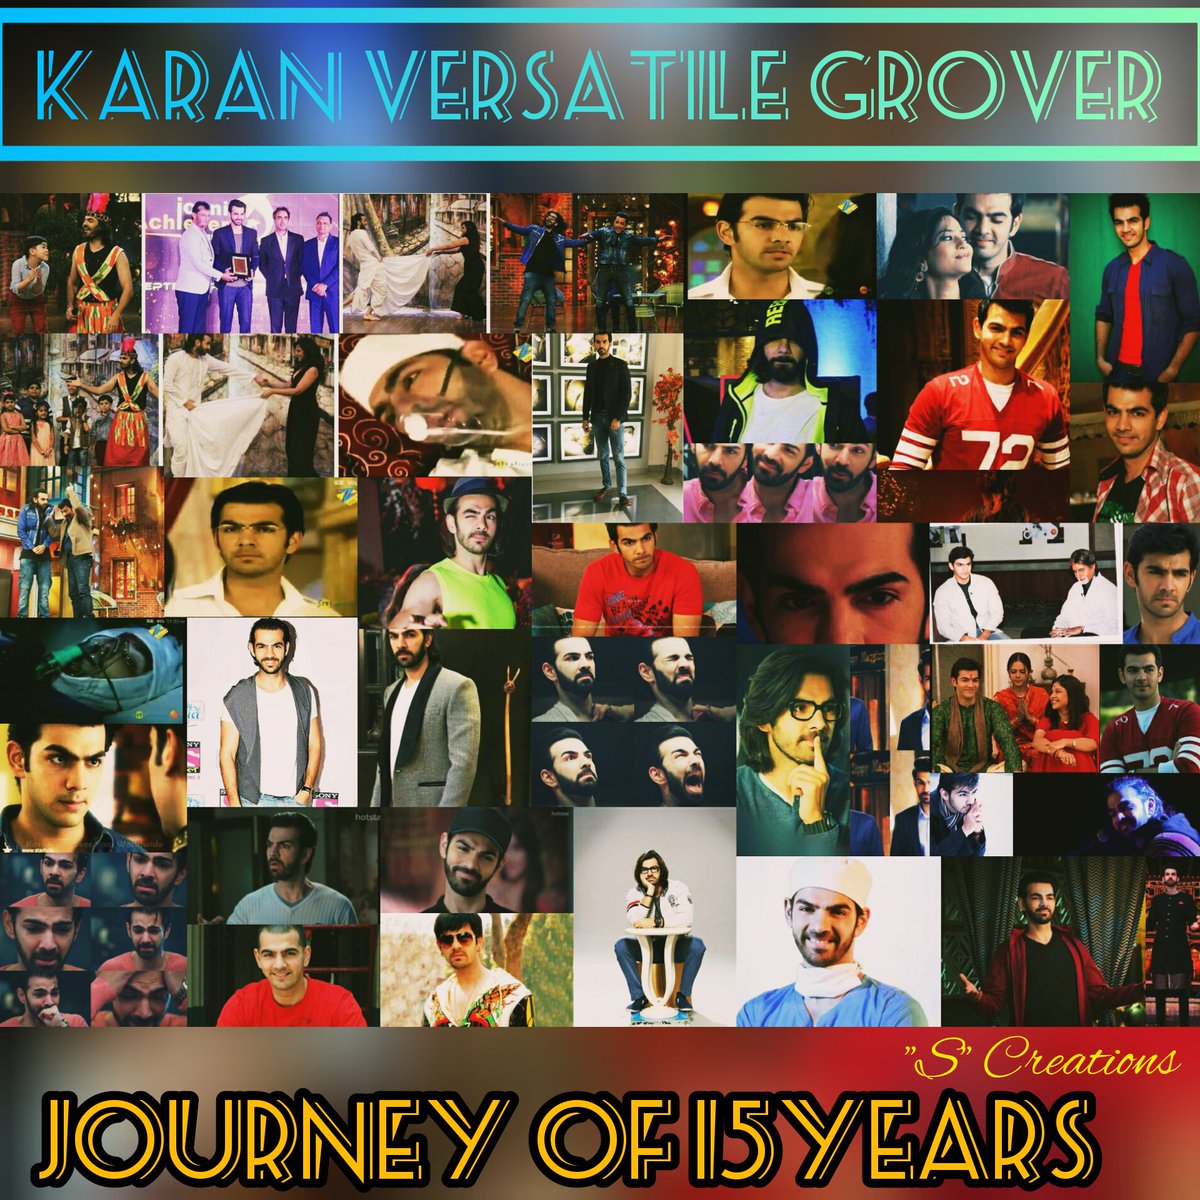 Even though Characters r created by writers/creatives but it's Actor who makes it lovable n appreciated THANK YOU  #KaranVGrover for these beautiful characters to love n learn from Many more Years to Come many more memories to be made Keep Shining  #KVGians